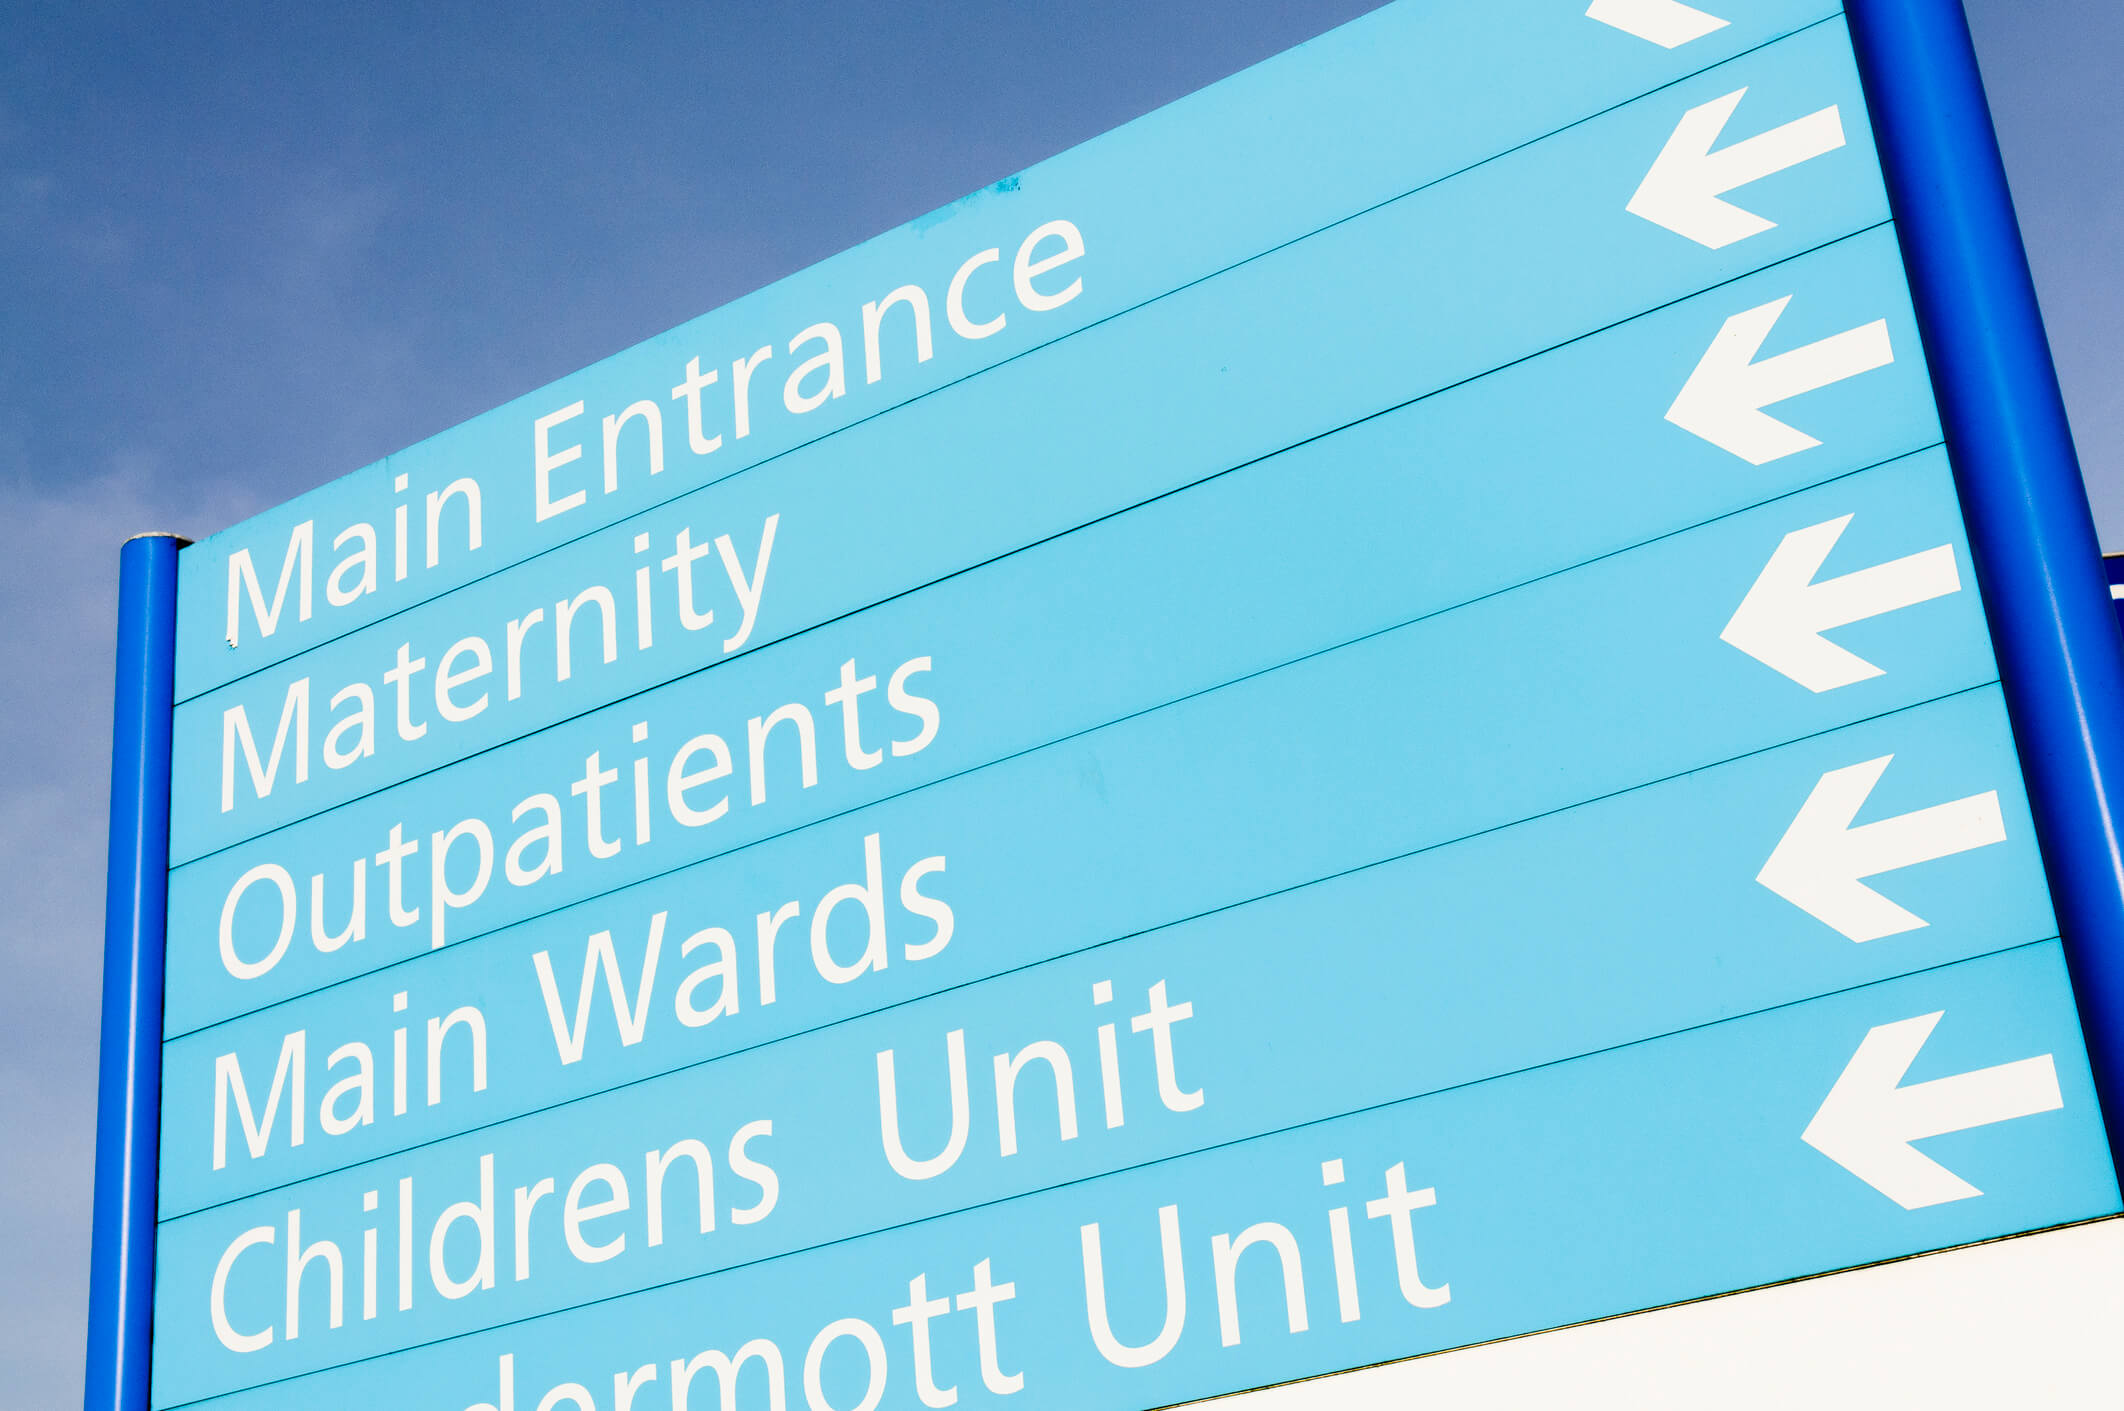 Sign showing directions to various Hospital wards and units